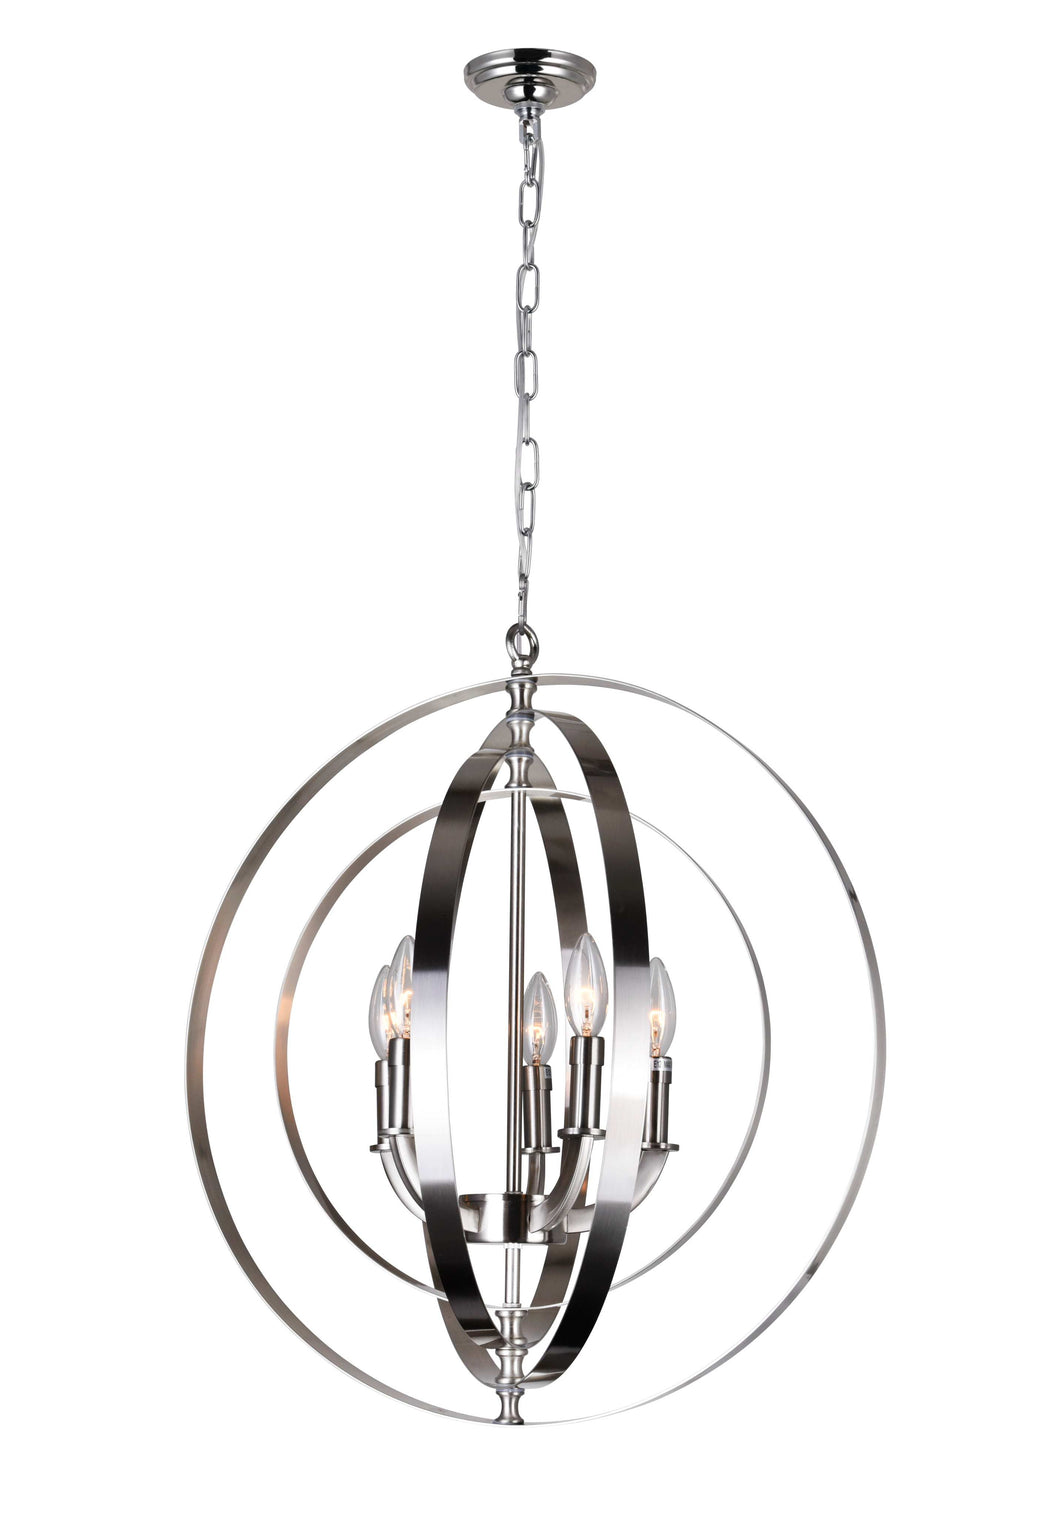 5 Light Up Chandelier with Satin Nickel finish